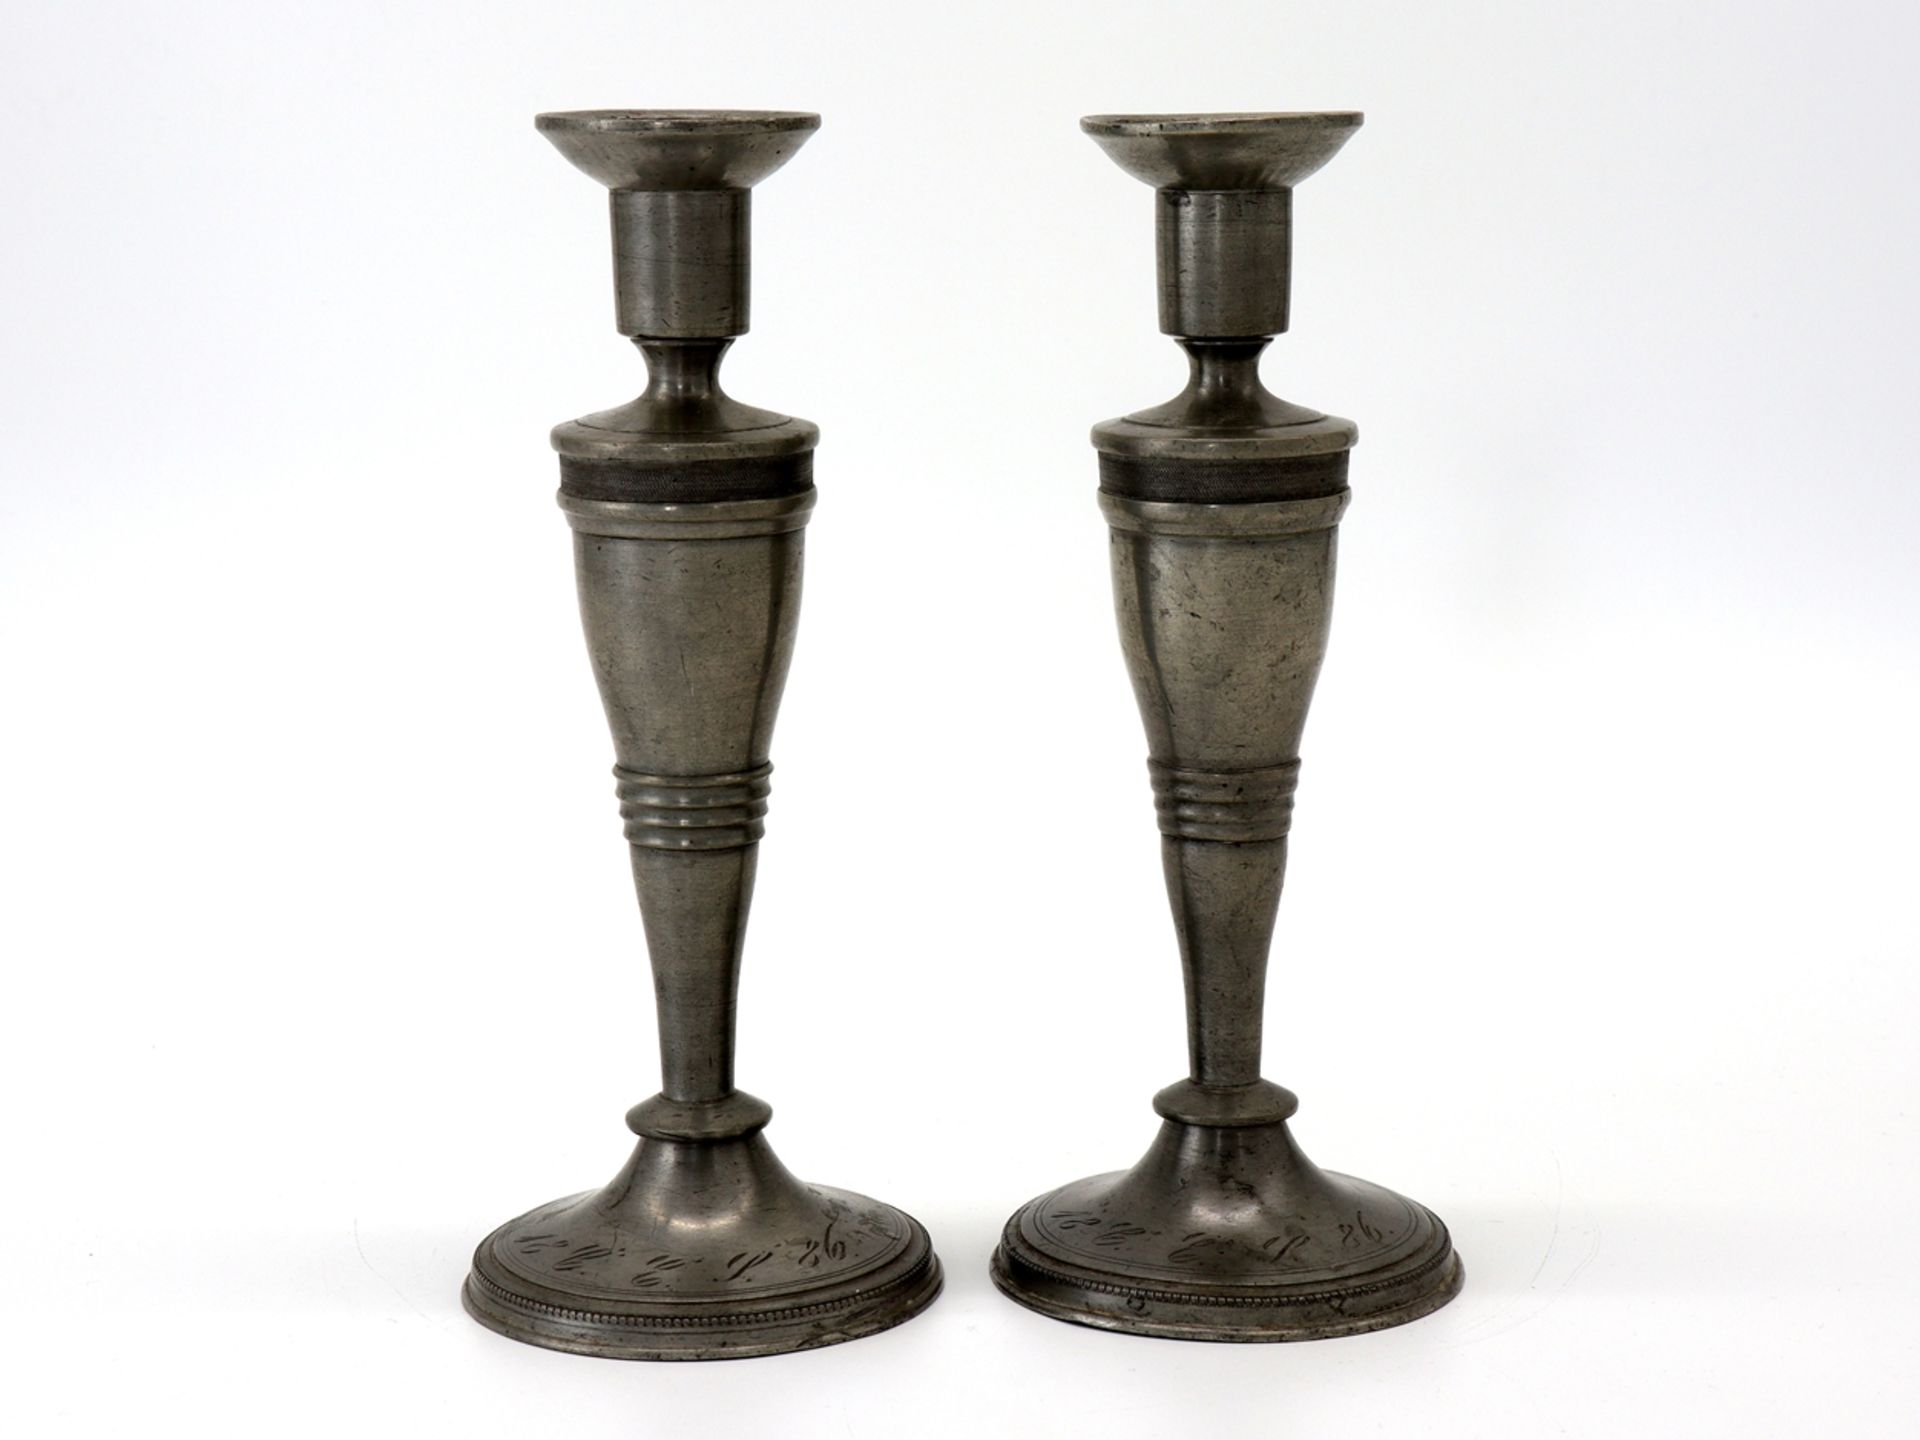 Pair of candlesticks pewter, dated 1886